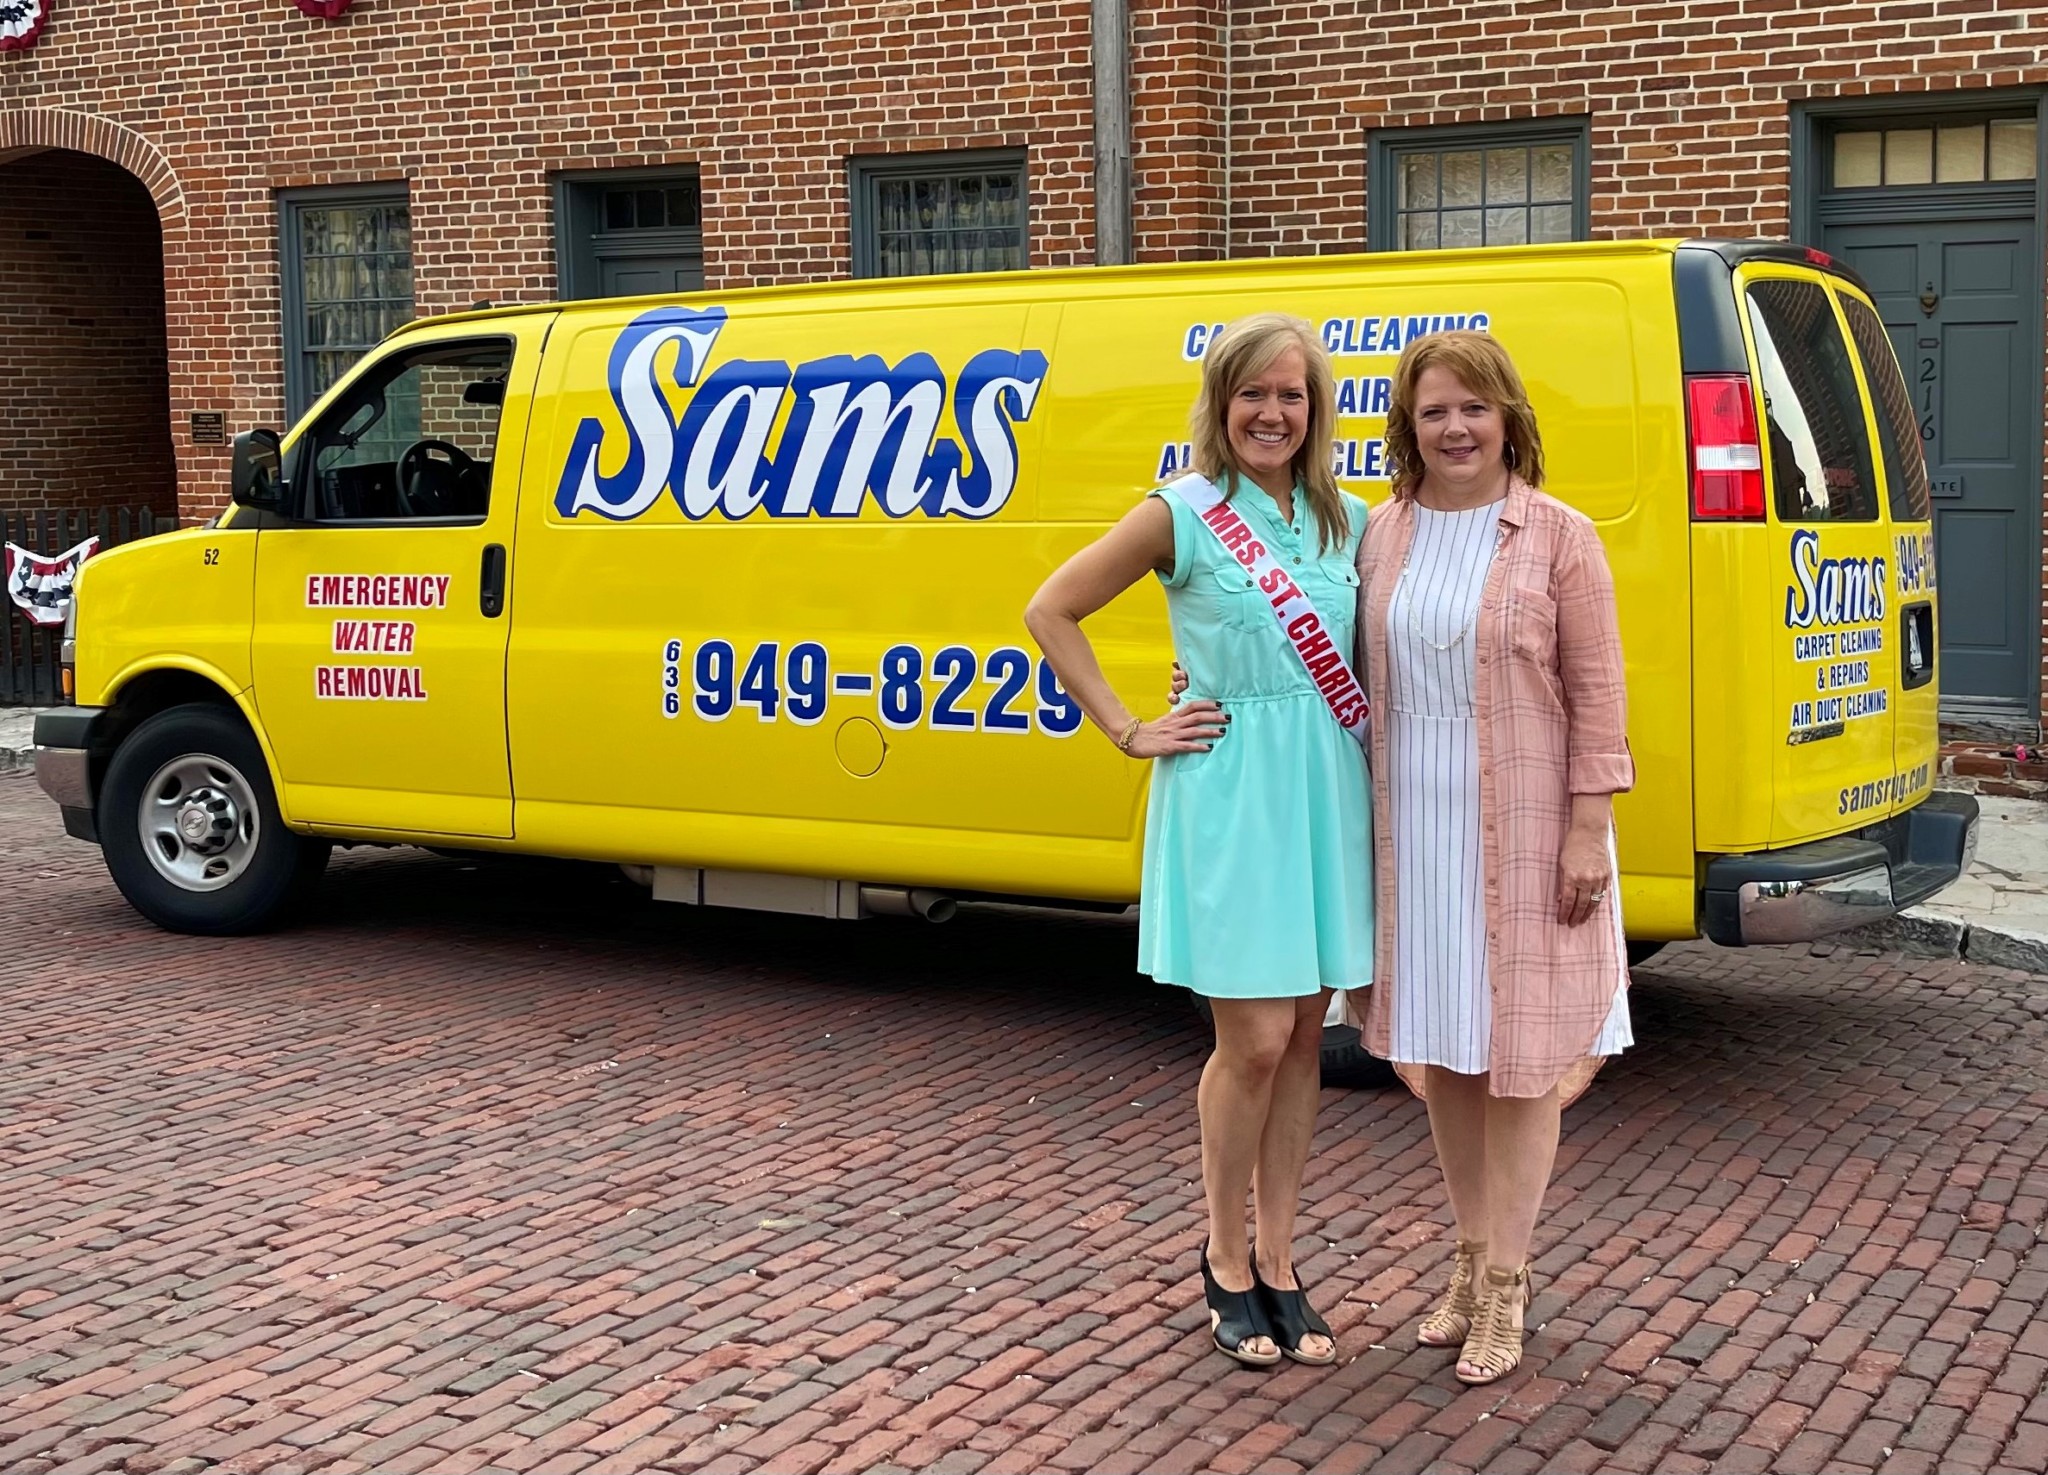 Marcy Bursac and Susan Sams standing in front of a trademark yellow Sams Carpet Cleaning and Repairs van